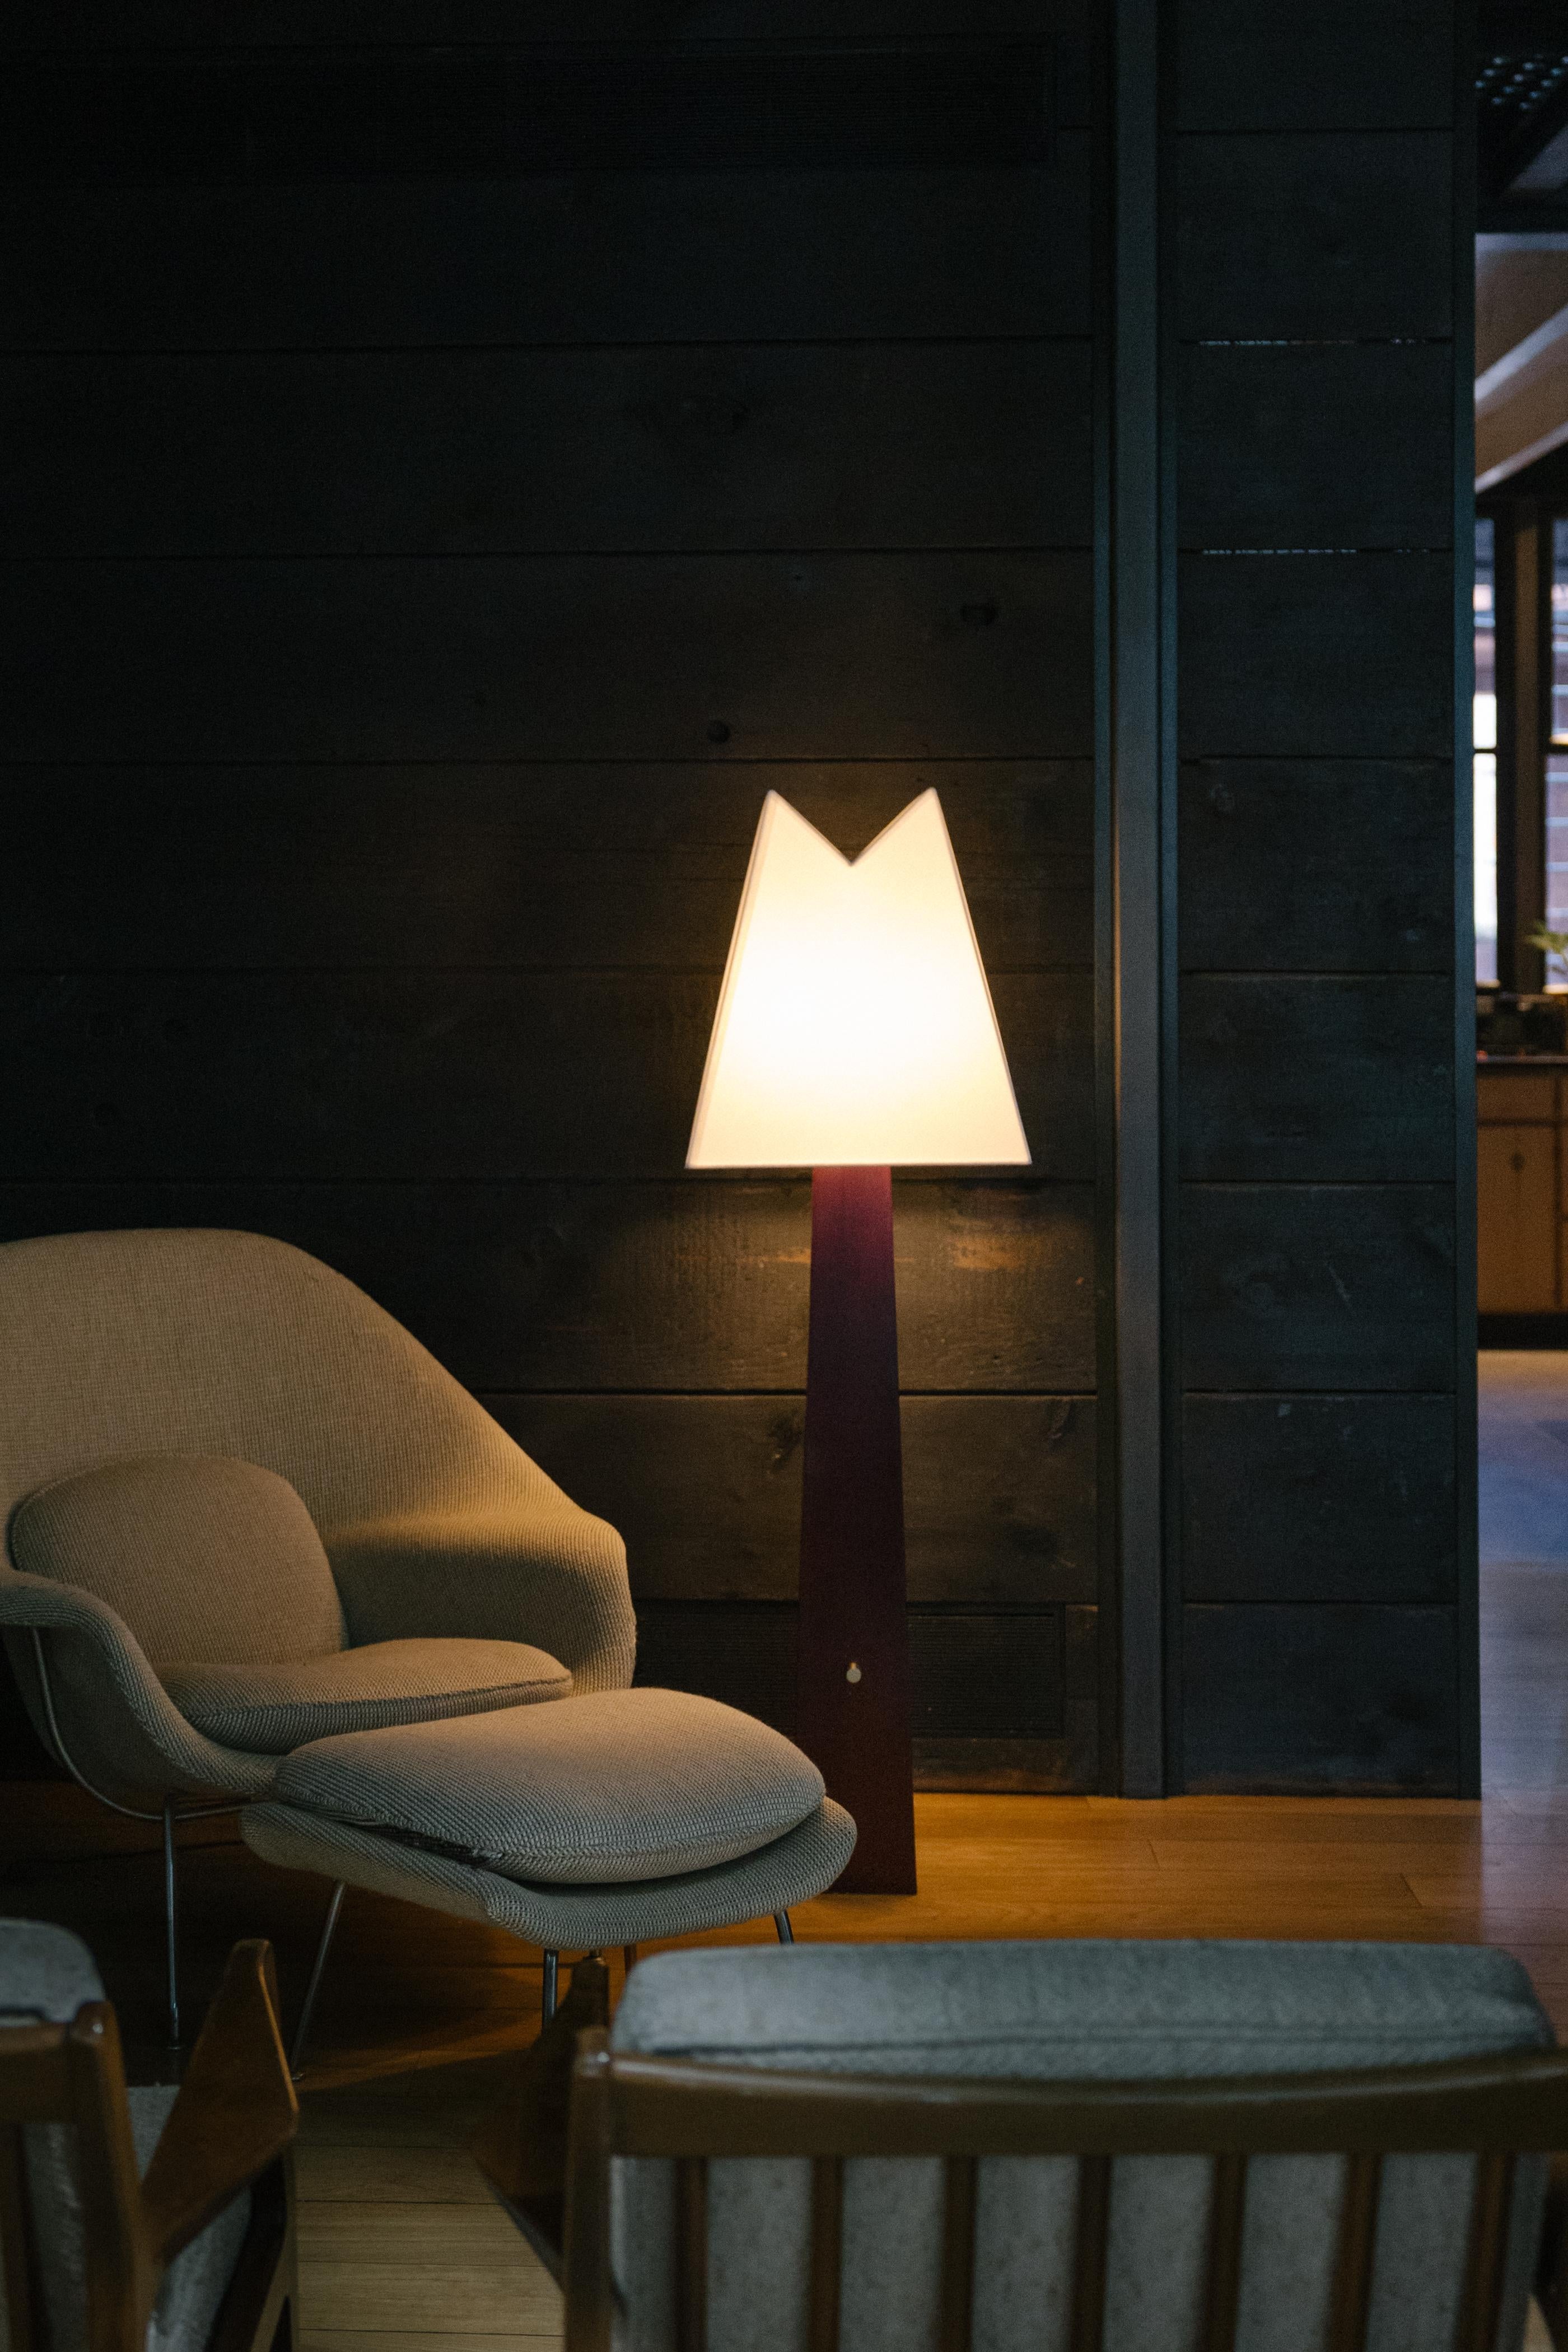 Born of nostalgia, the Alpine Lamp echoes natural forms and mountainous contours. The natural wooden base grounds the piece in earthy materials, evoking the altitude of Utah forests; the “V” of the lampshade mirrors the notch in Lone Peak, a